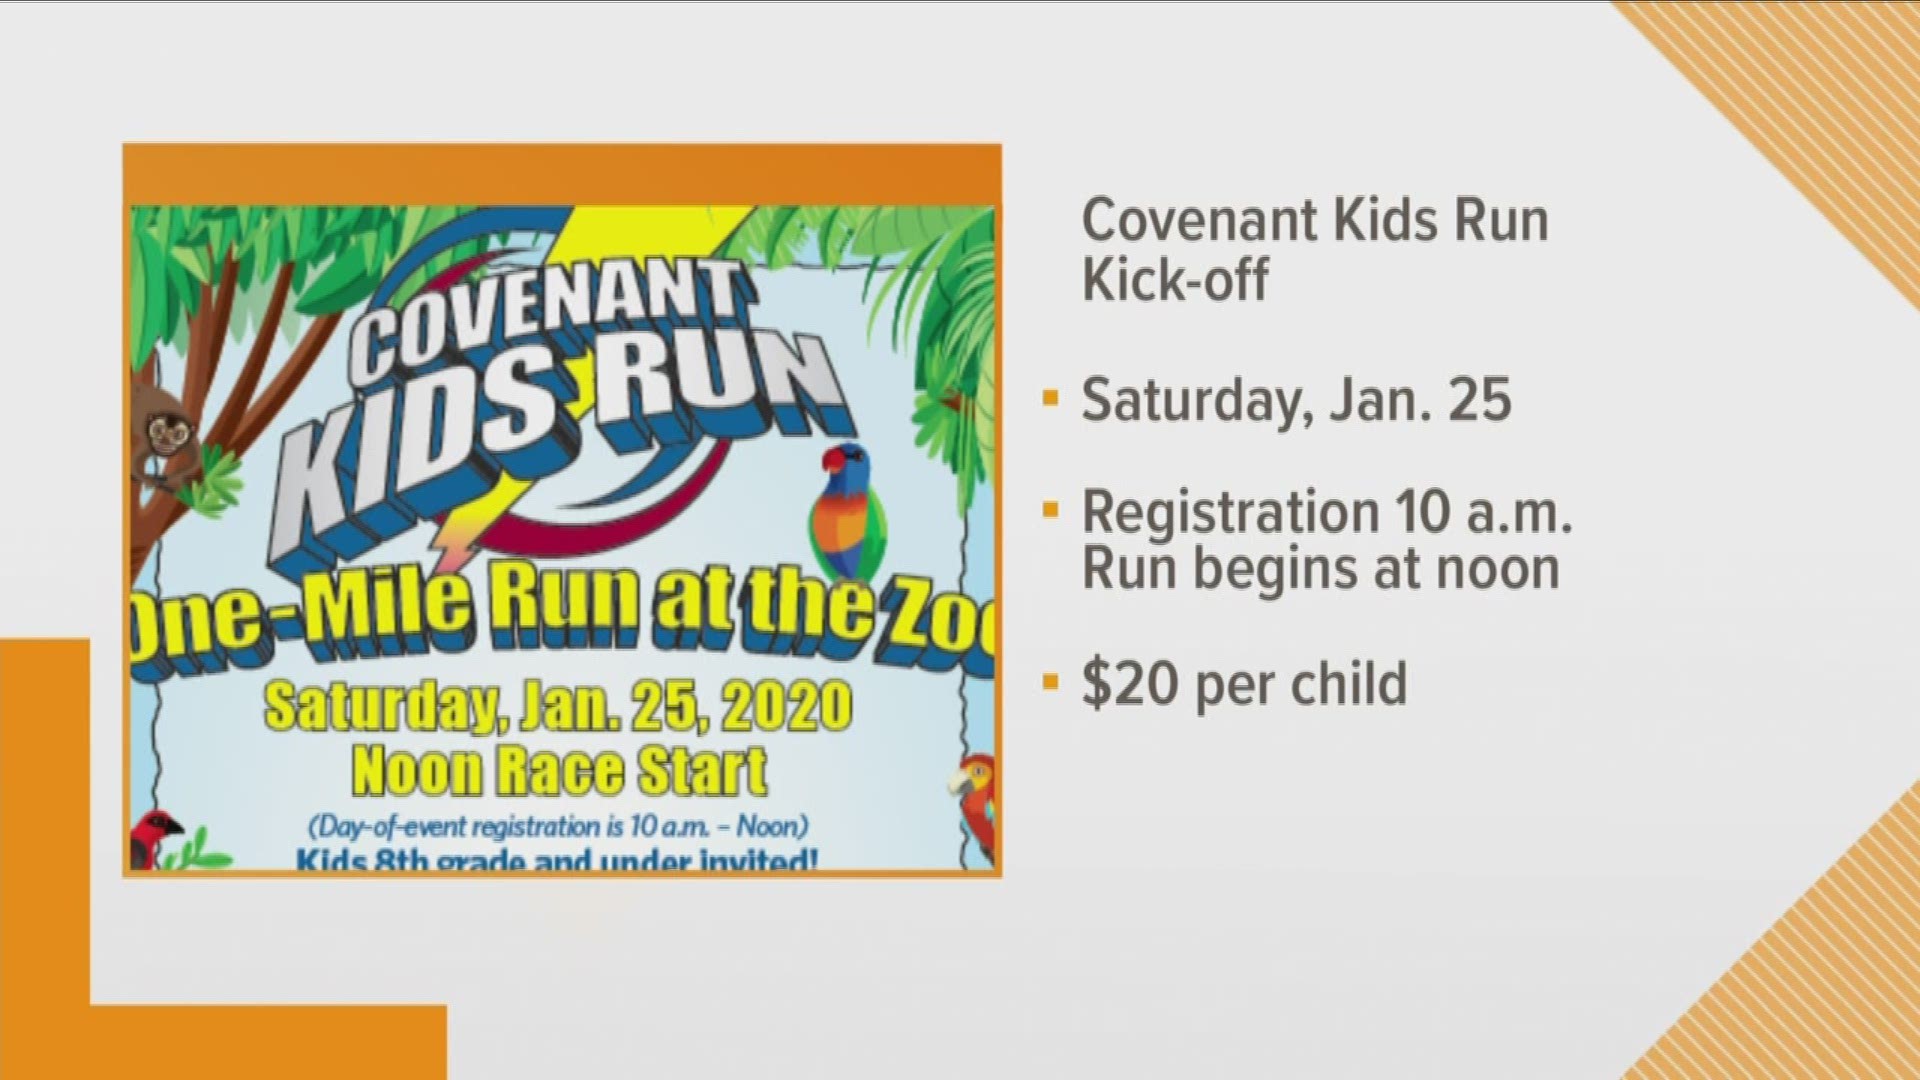 The annual Covenant Kids Run Kickoff at Zoo Knoxville is Jan. 25. You can register for $20 per child, the fee also includes registration for the March 28 event.